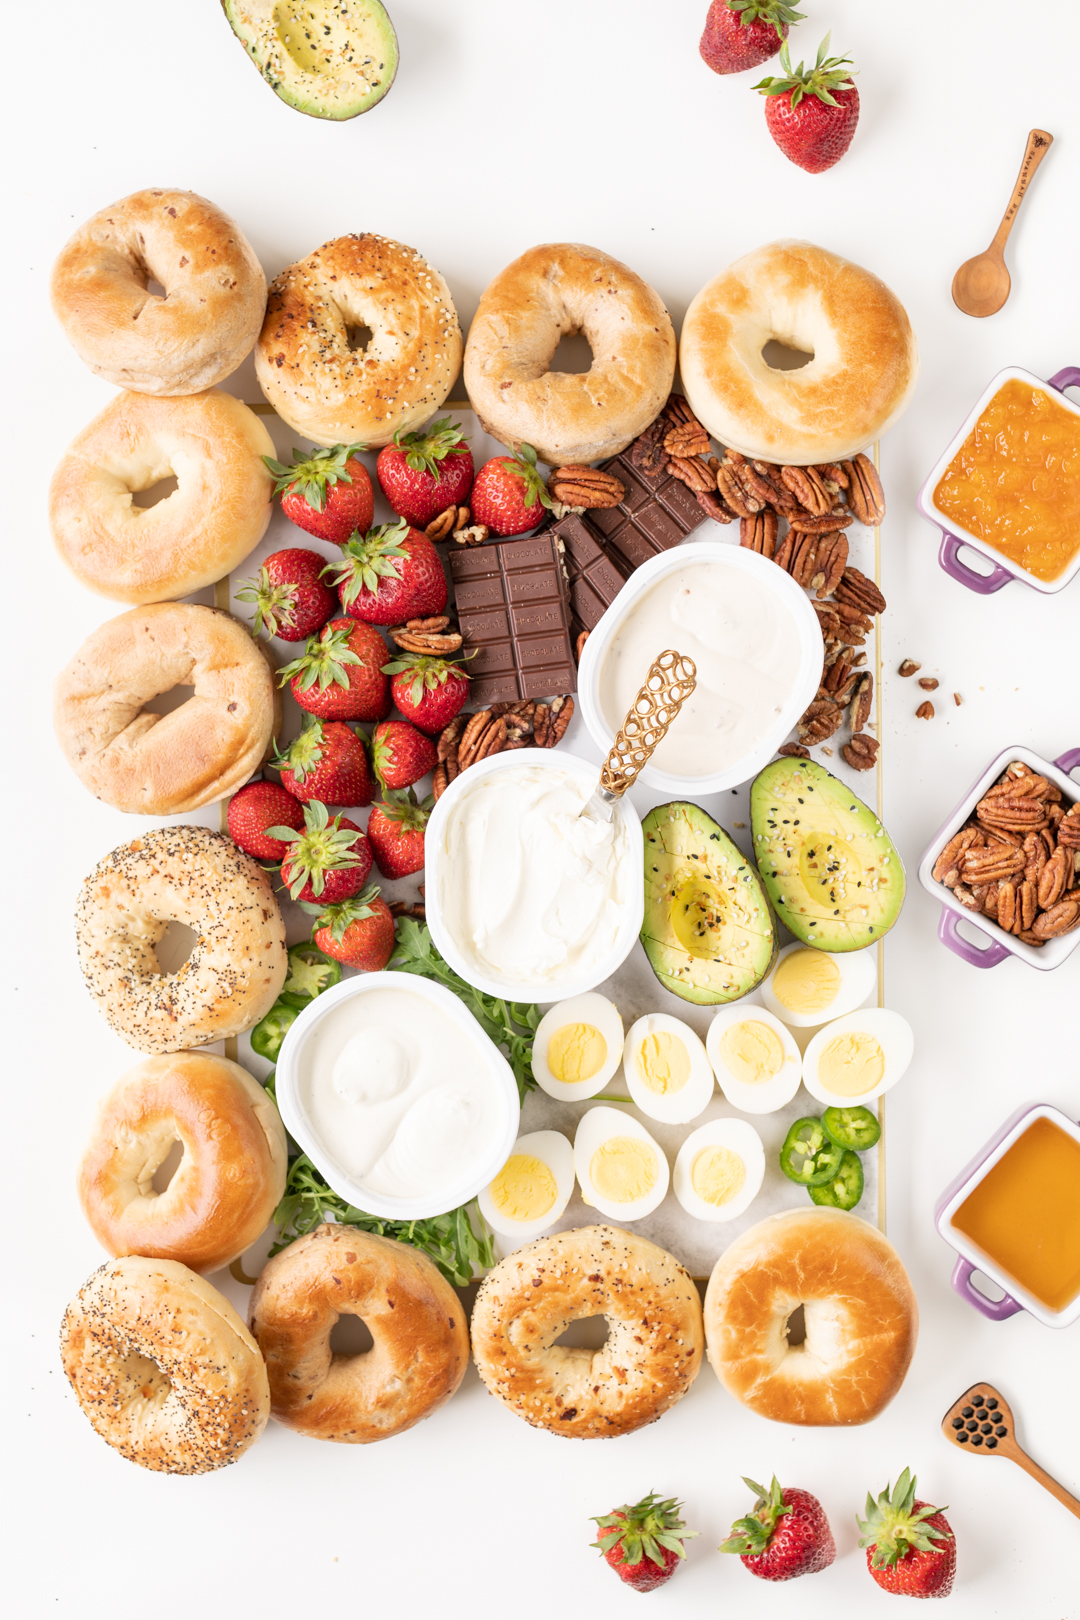 Delish brunch spread with bagels and cream cheese